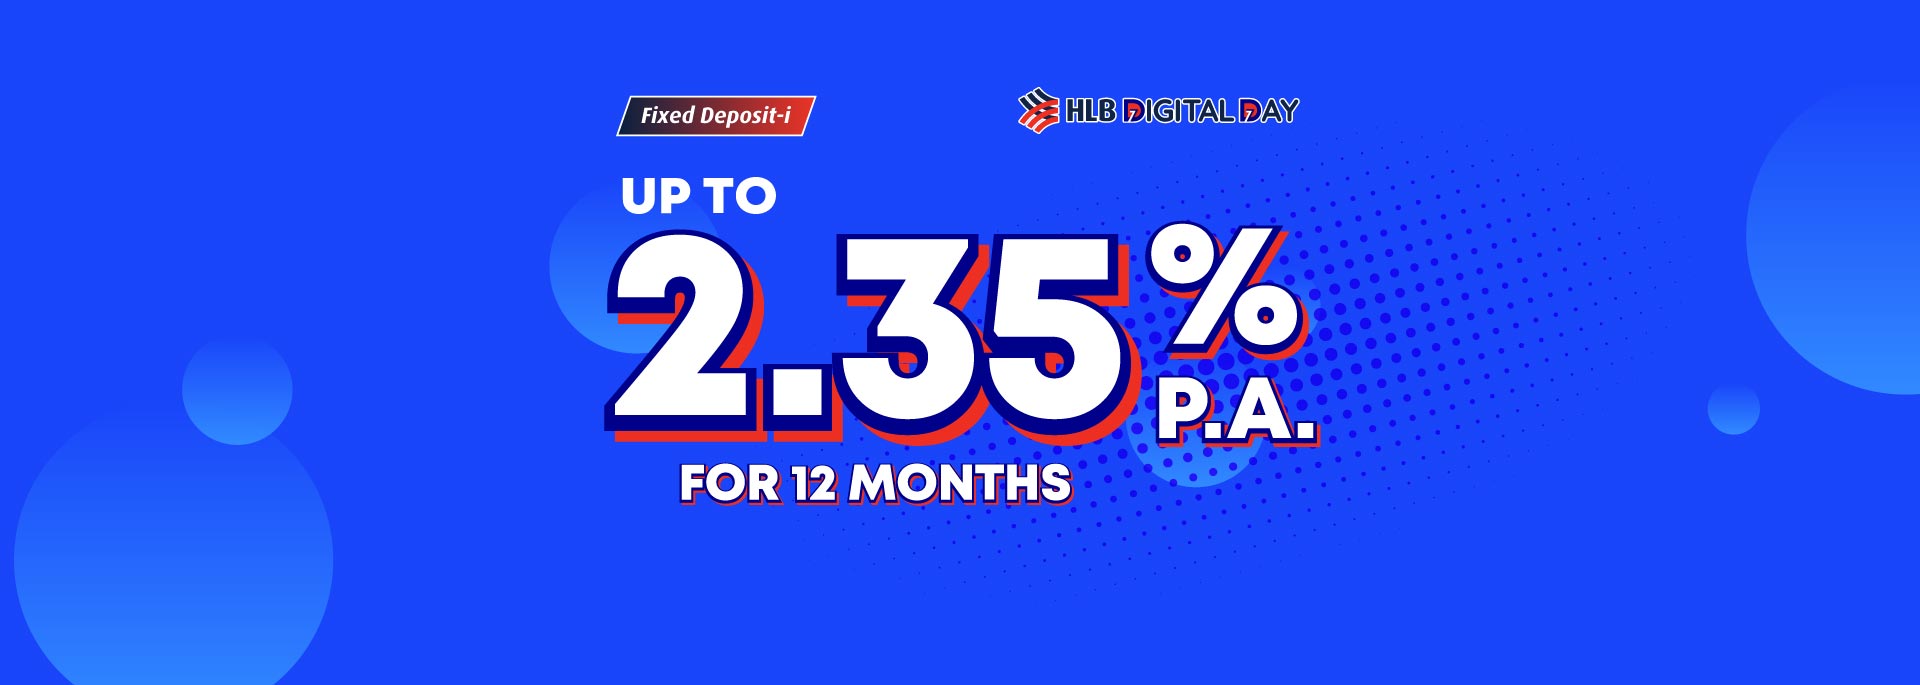 Fixed Deposit-i up to 2.35% p.a. for 12 months